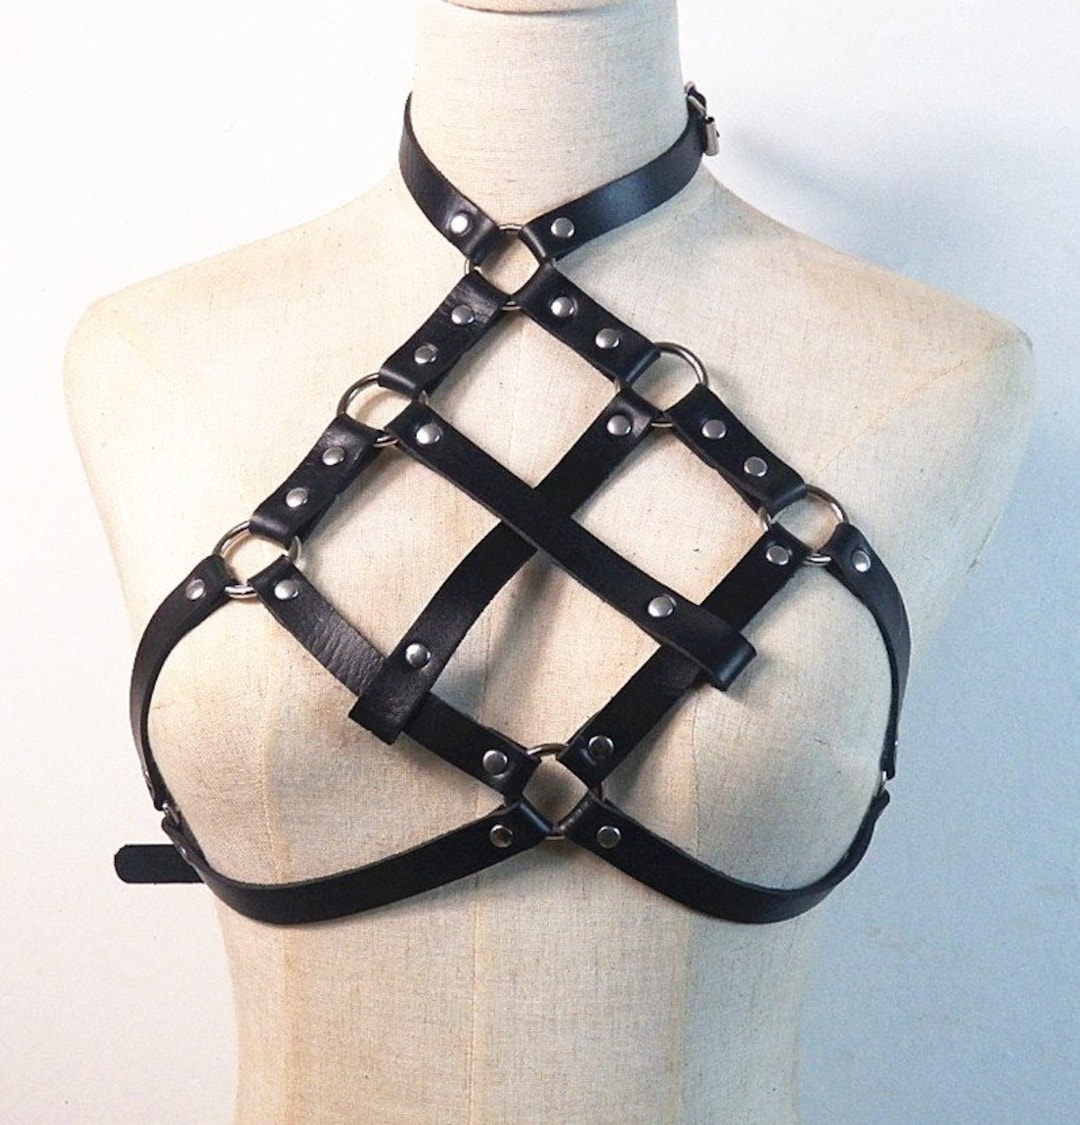 Women Harness Leather Lingerie Leather Cage Bra Body Cageleather Harness Bdsm Harness